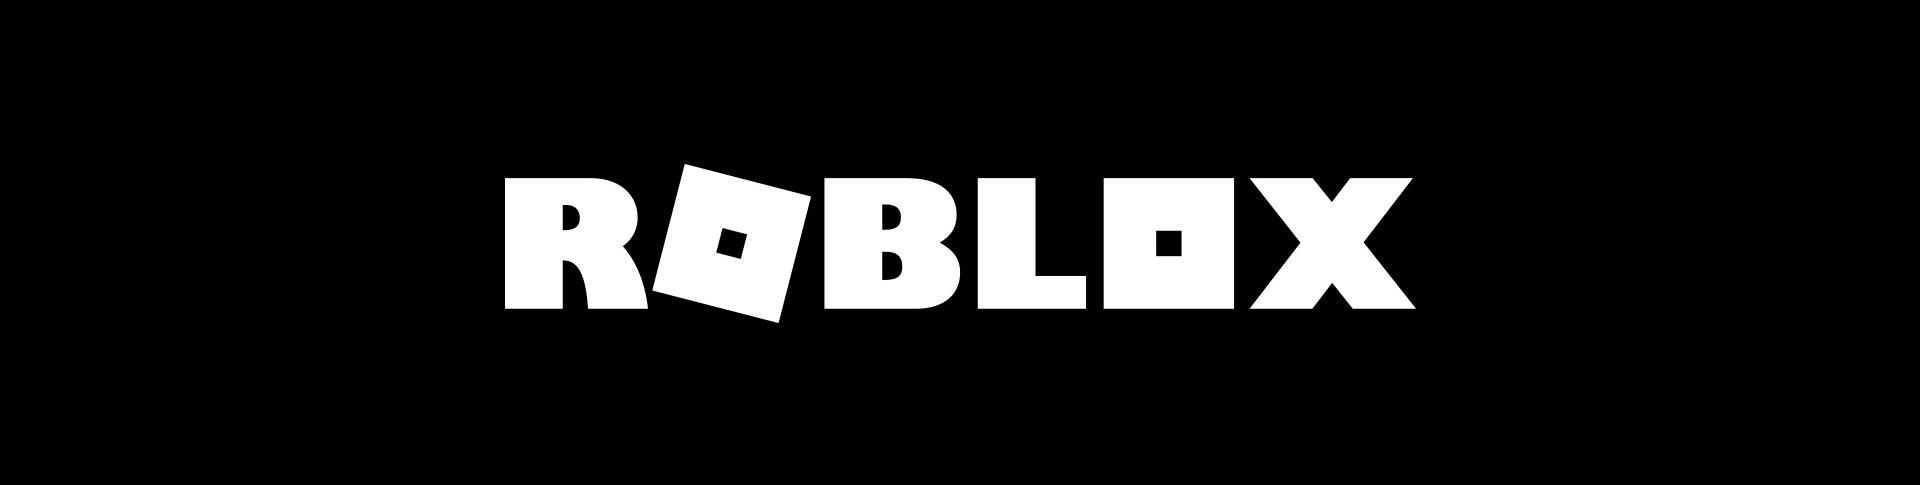 A Complete History Of The Roblox Logo Pocket Tactics - how to draw roblox logo